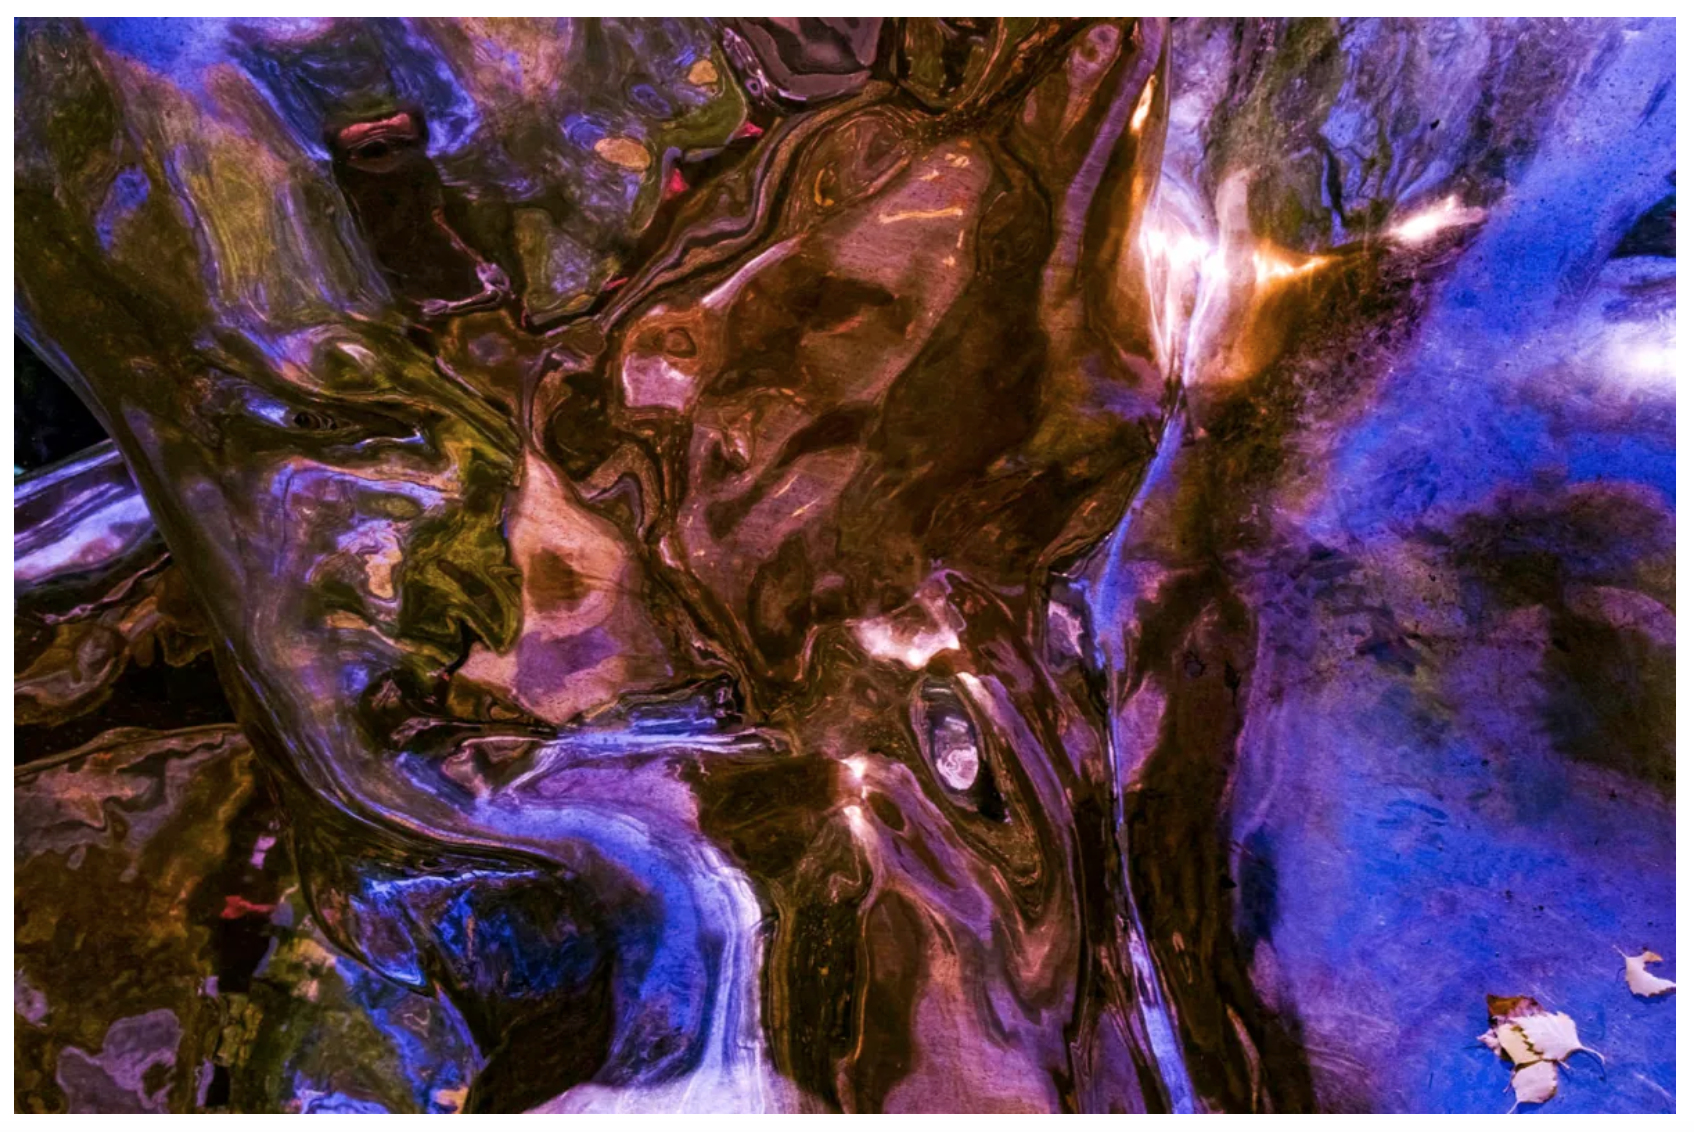    Mari Amman&nbsp;     An Apophatic Way of Knowing Water  and  Over a Streambed a Body Formed in the Light Refracted in Waves, 2019   2 photographs, Giclee, artist proof print  30cm x 50 cm 